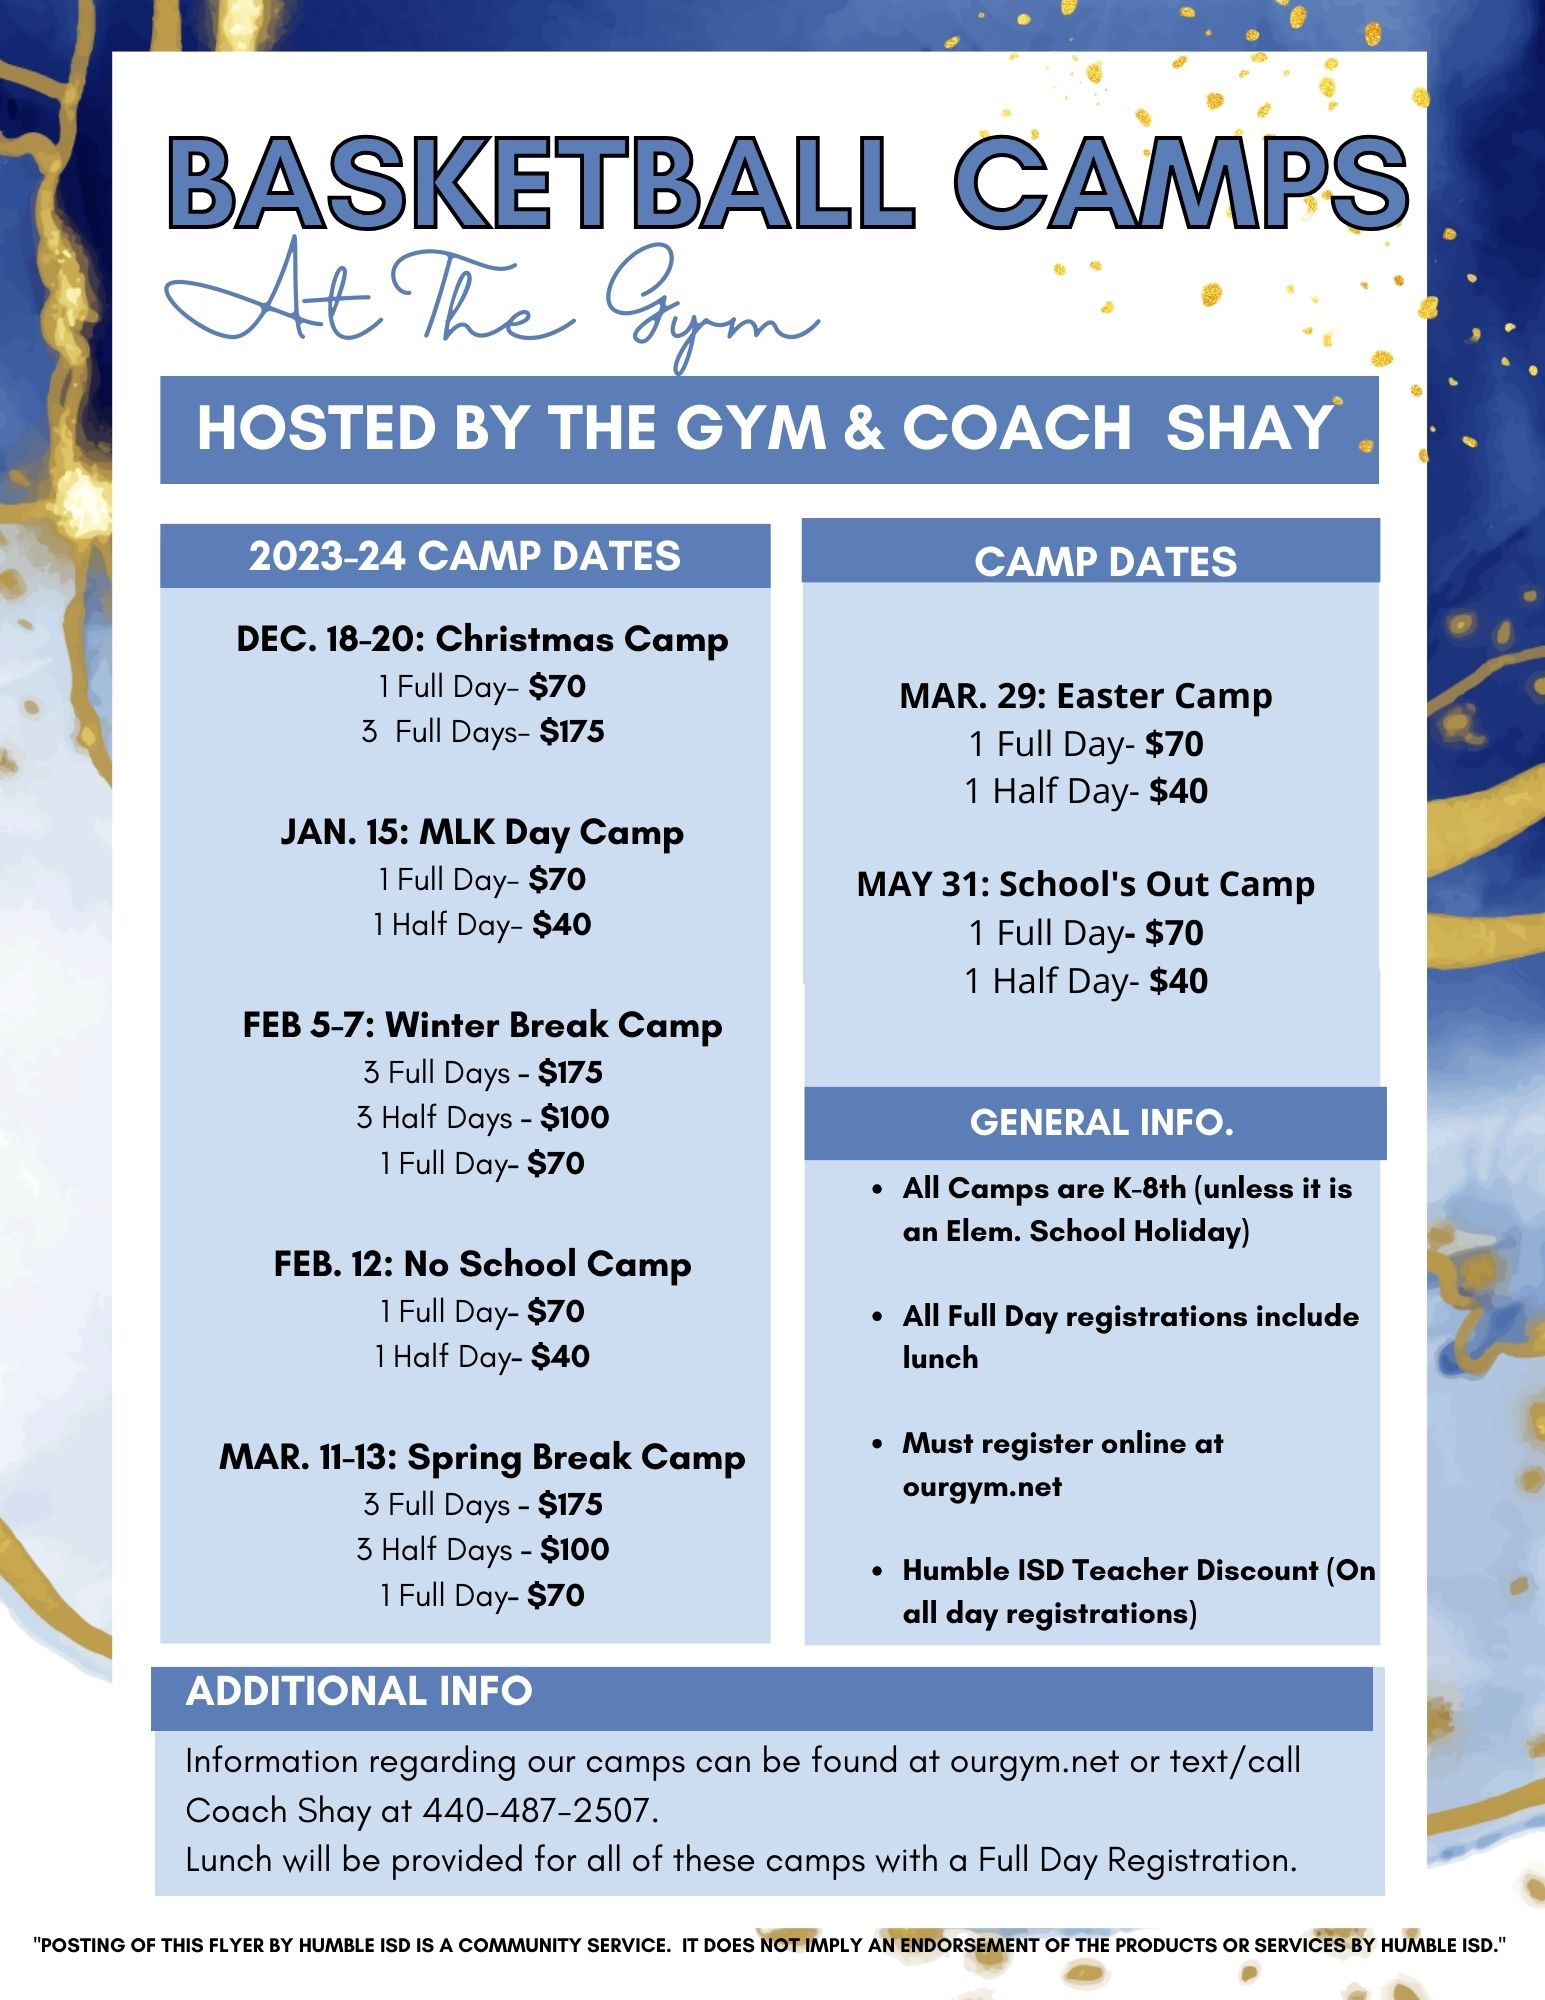 The gym bb camps